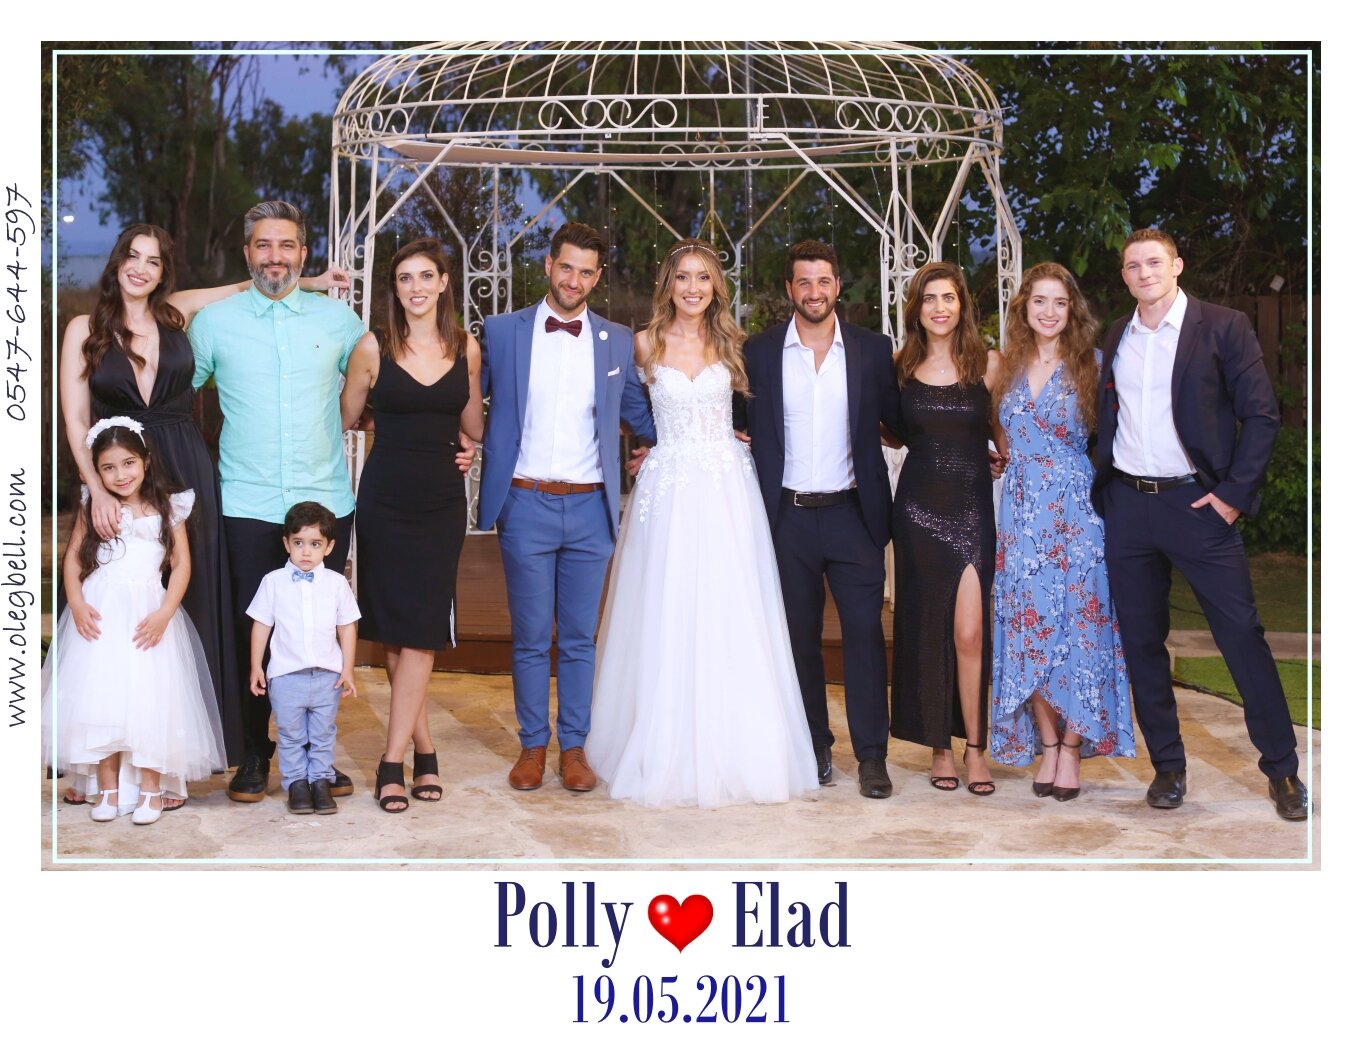 POLLY_AND_ELAD_WD_MG_SITE_009.JPG